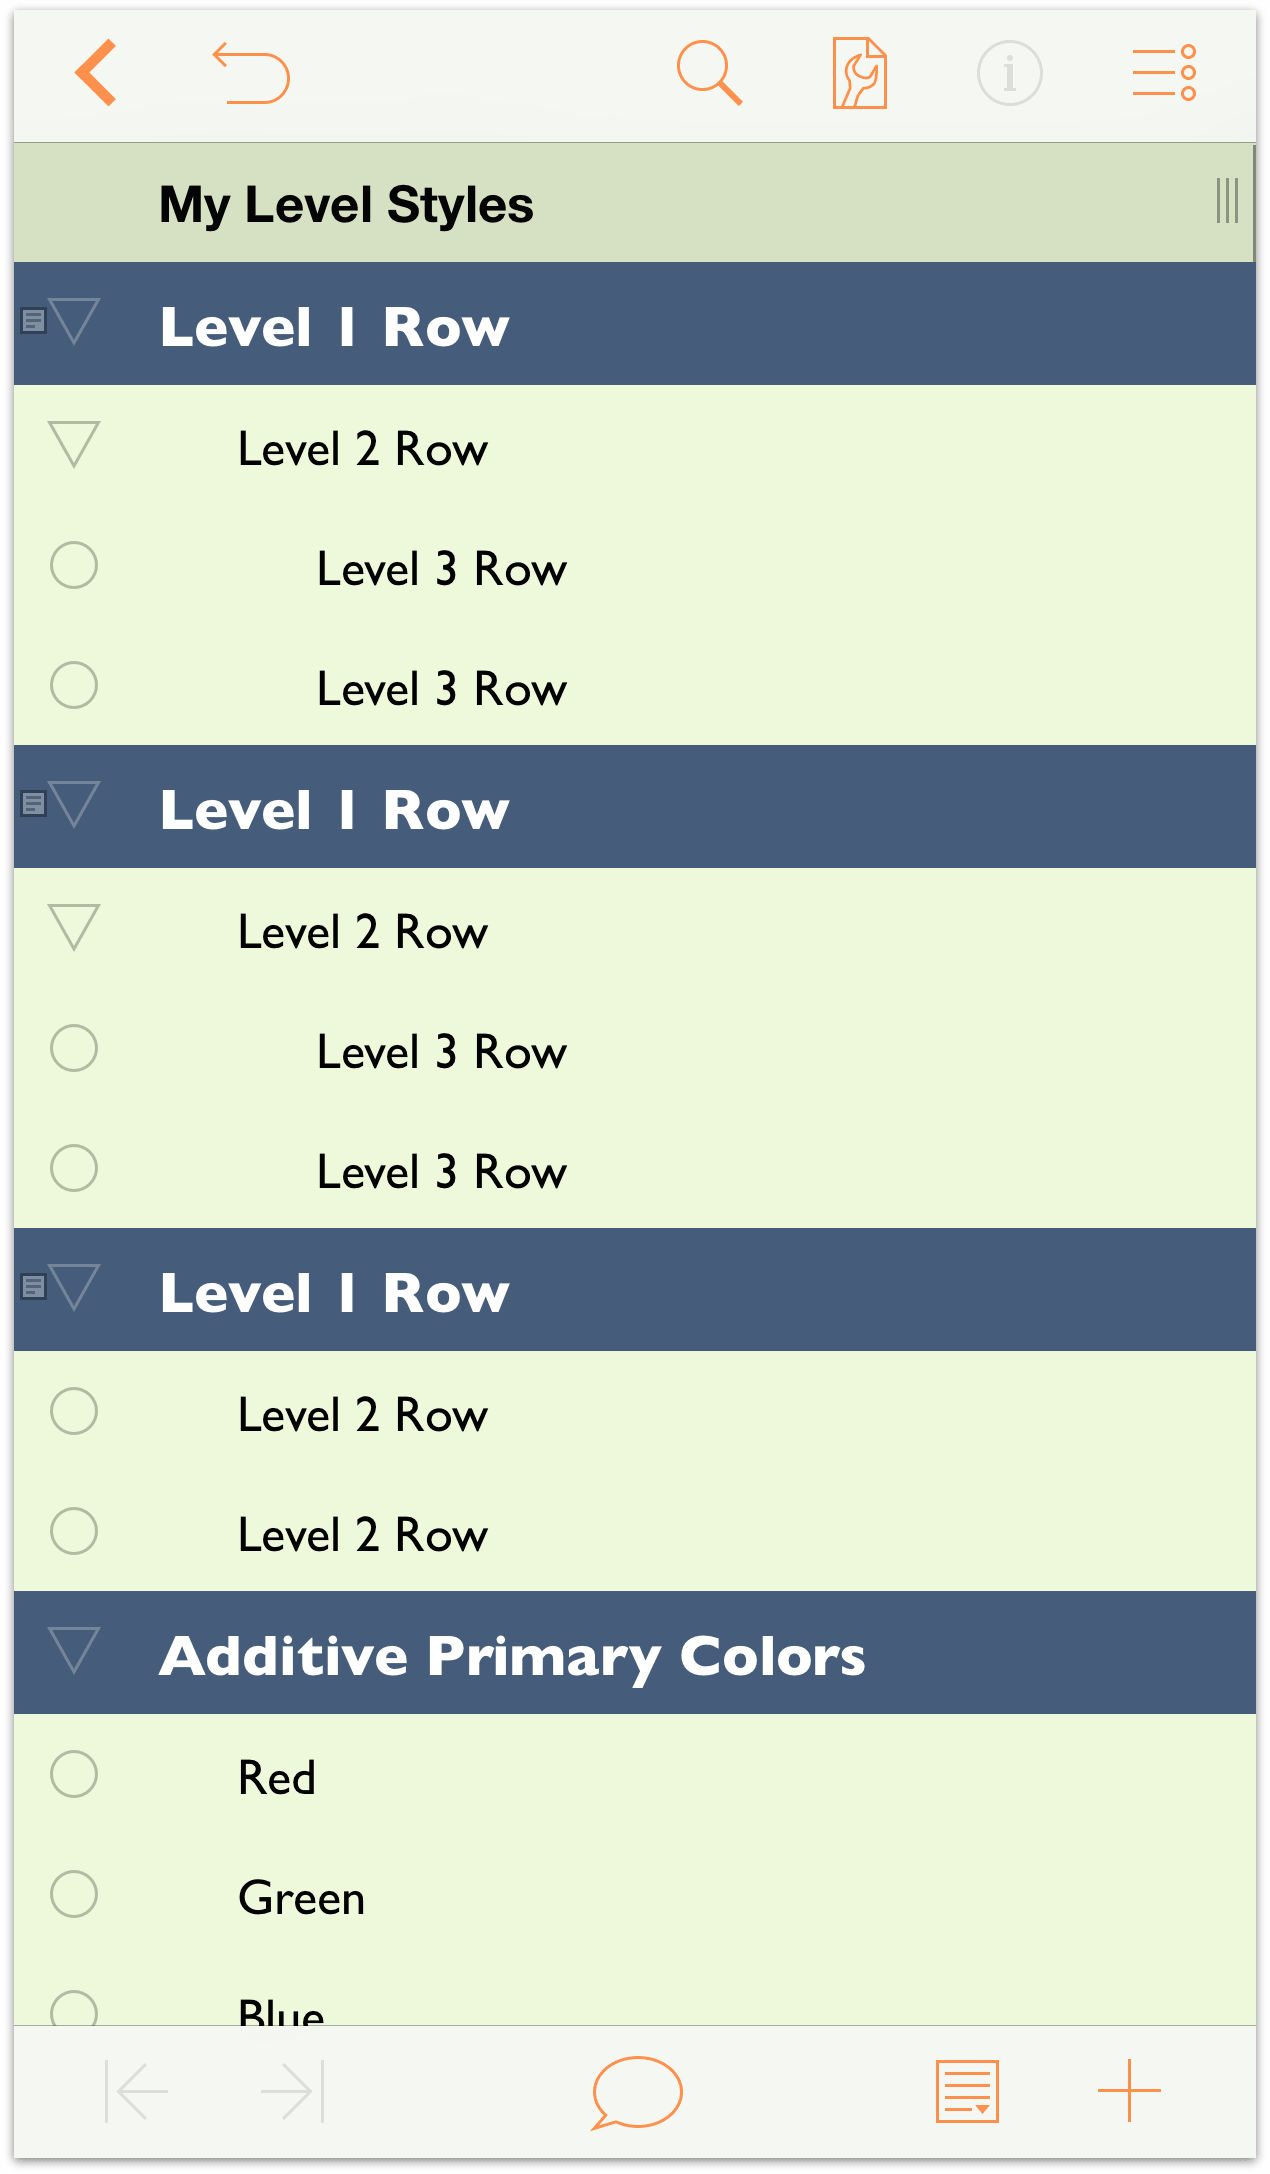 The outline showing the results of your work on the Level 1 Row styles